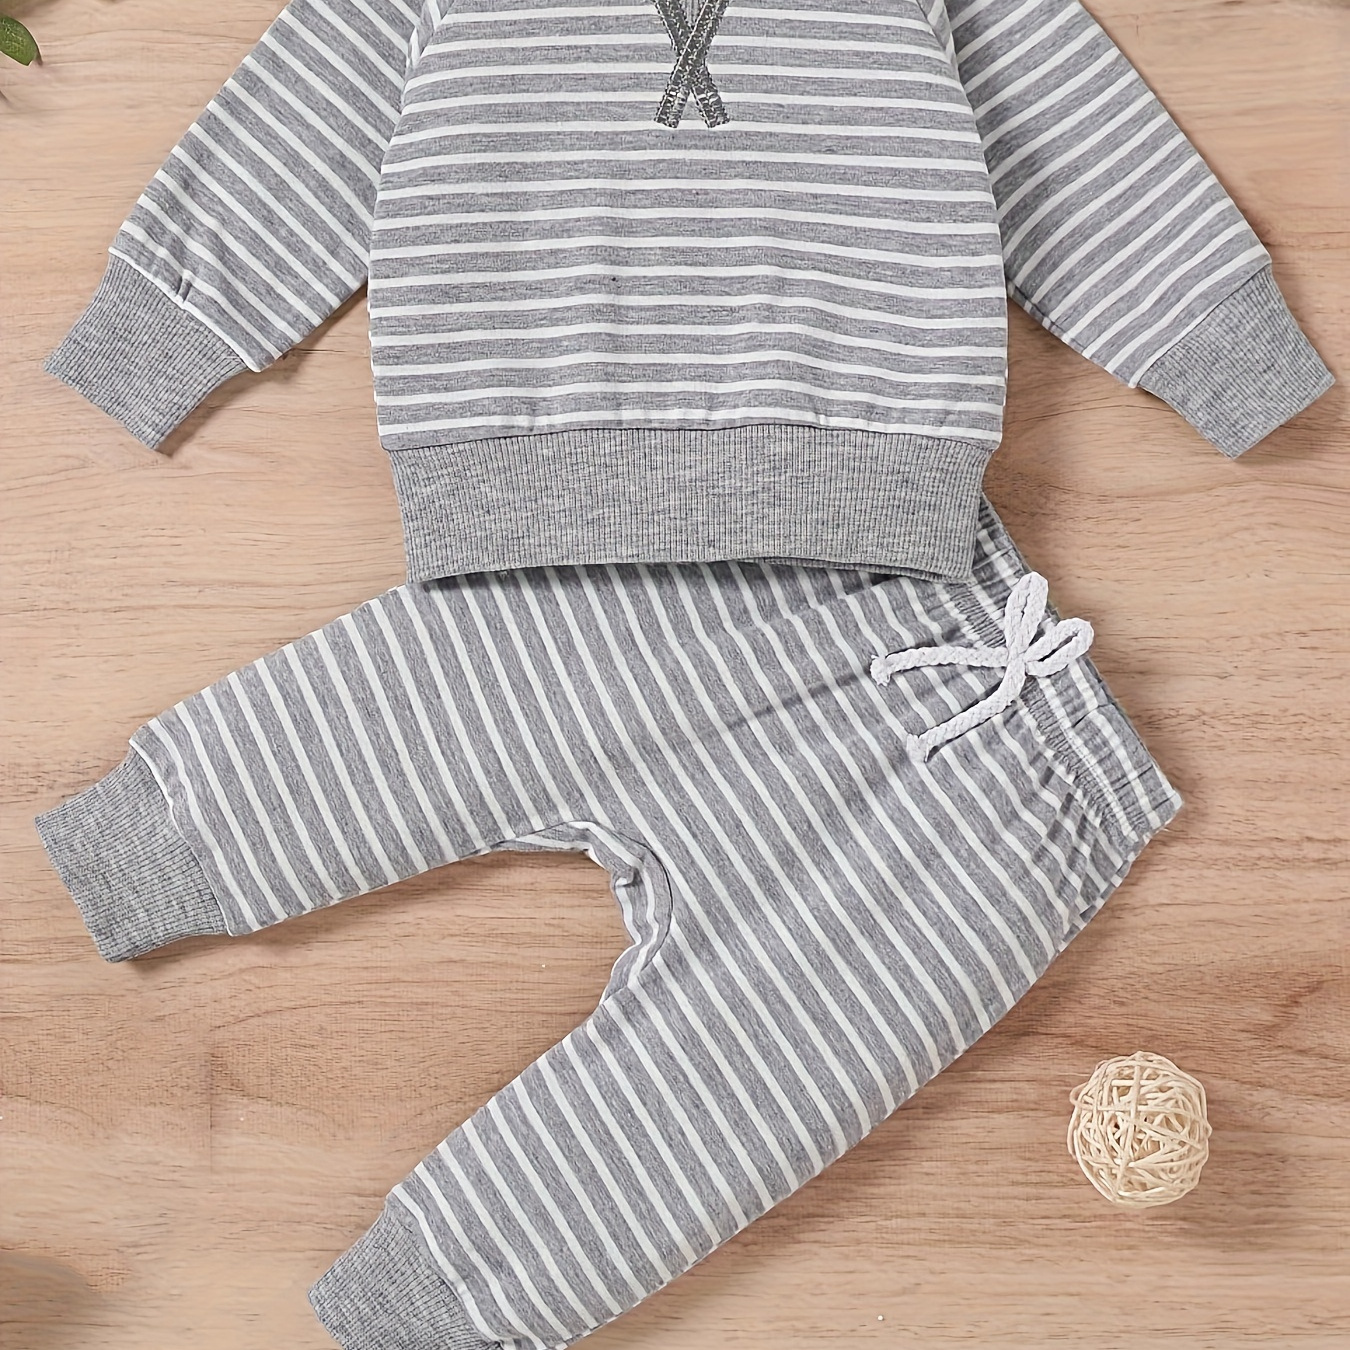 

2pcs Baby's Casual Stripe Pattern Sweatshirt & Comfy Pants, Toddler & Infant Boy's Clothing Set For Spring Summer